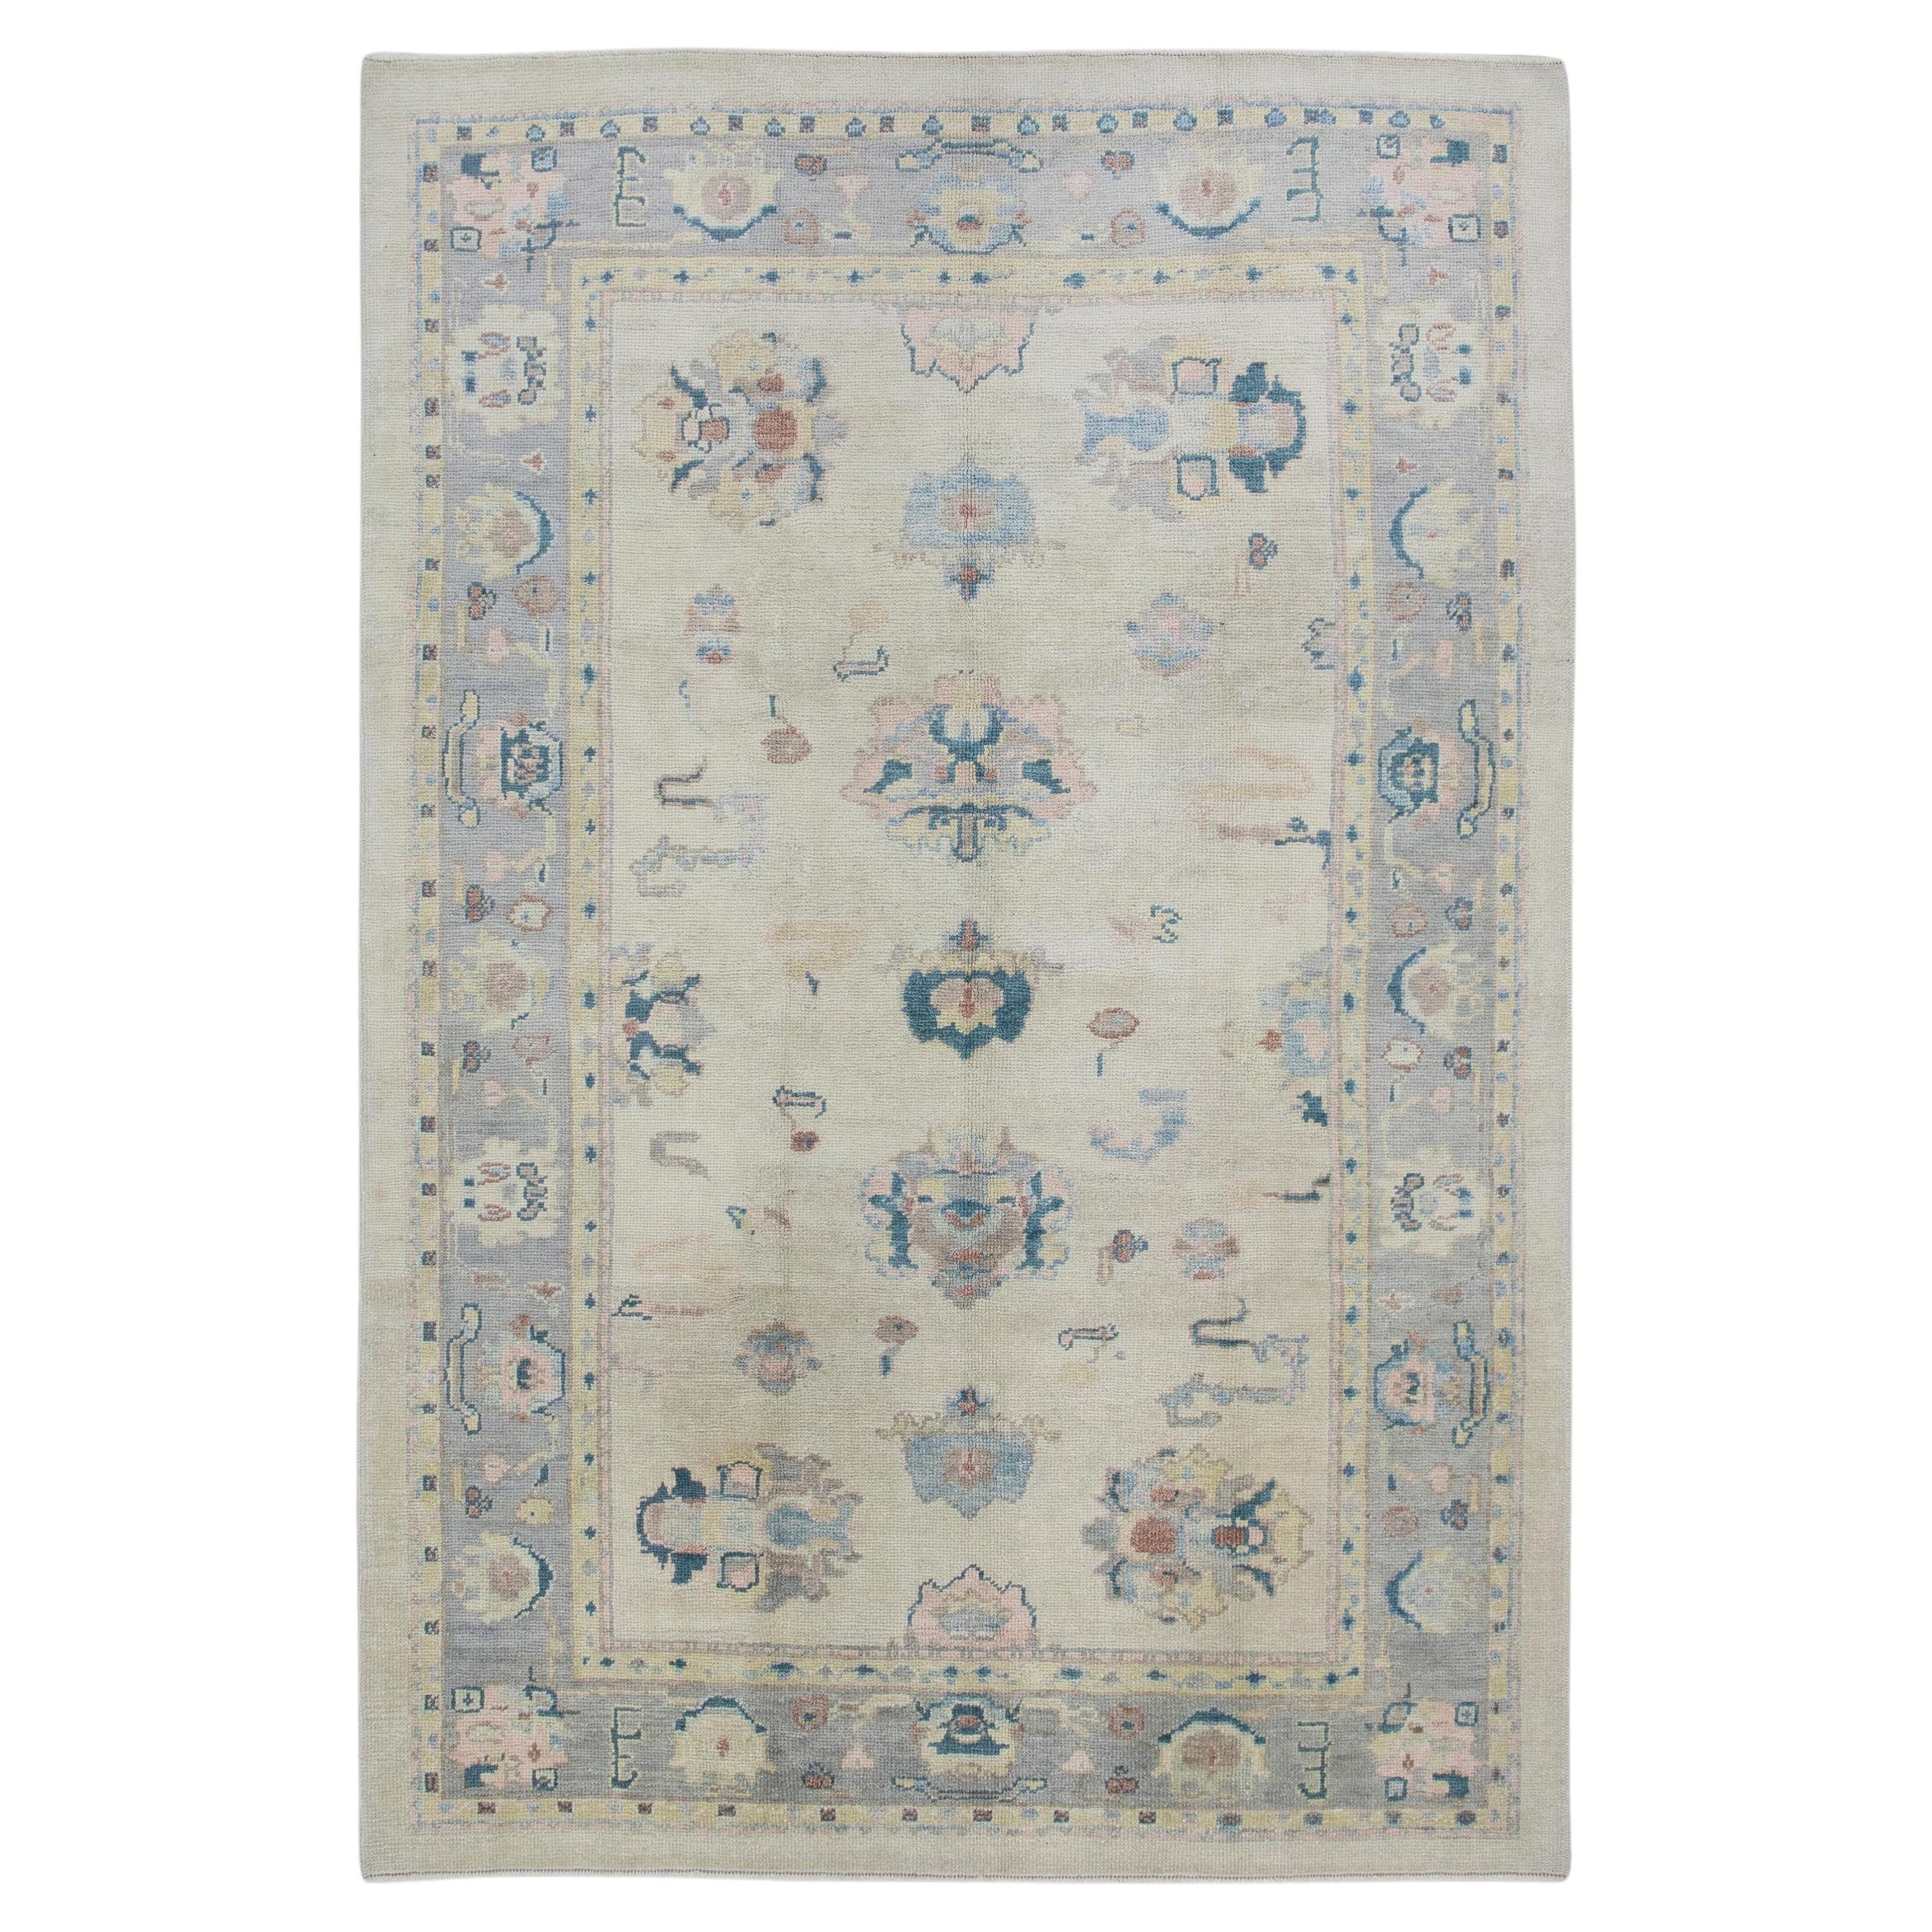 Cream Handwoven Wool Turkish Oushak Rug in Pink & Blue Floral Design 6'1" x 9'1" For Sale